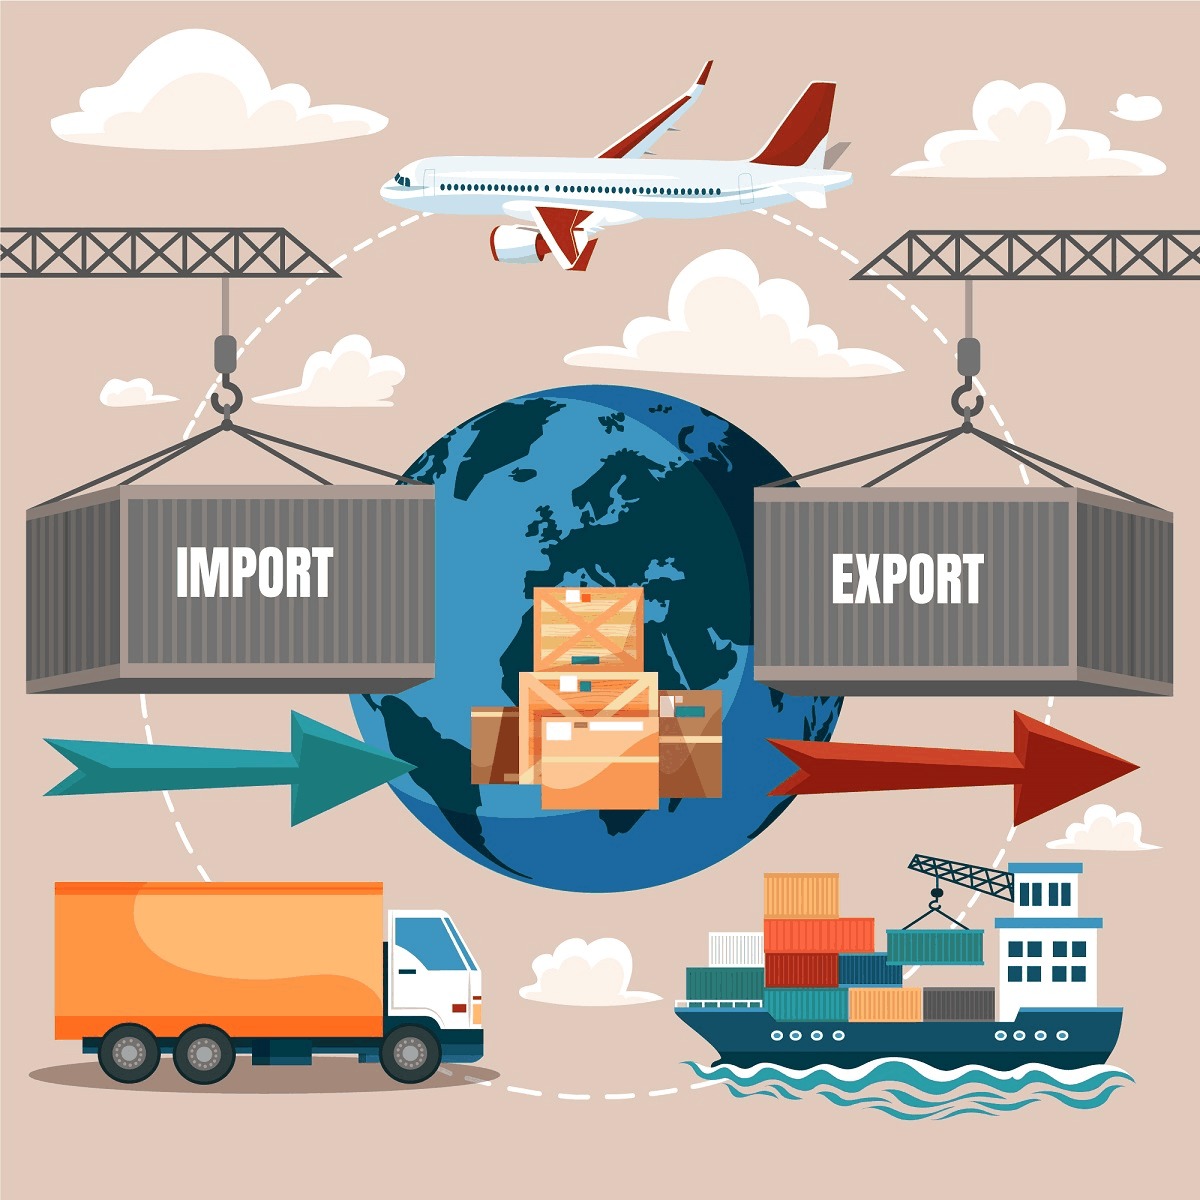 11 Ways to Reduce Your Freight Shipping Costs